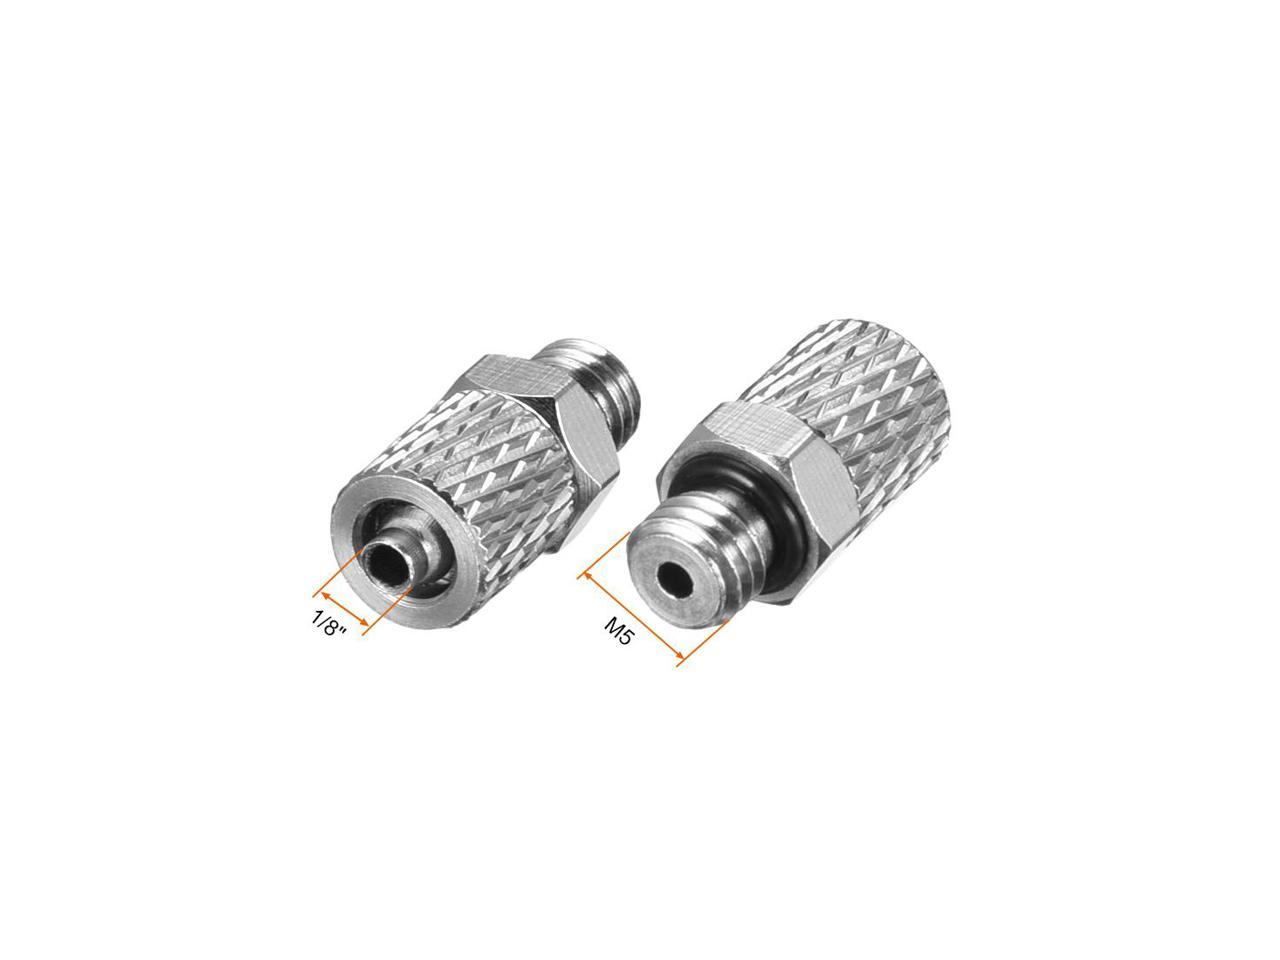 uxcell Straight Pneumatic Push to Connect Female Quick Fitting Adapter 6mm or 15/64 Tube OD x 1/8 G Silver Tone 2pcs 